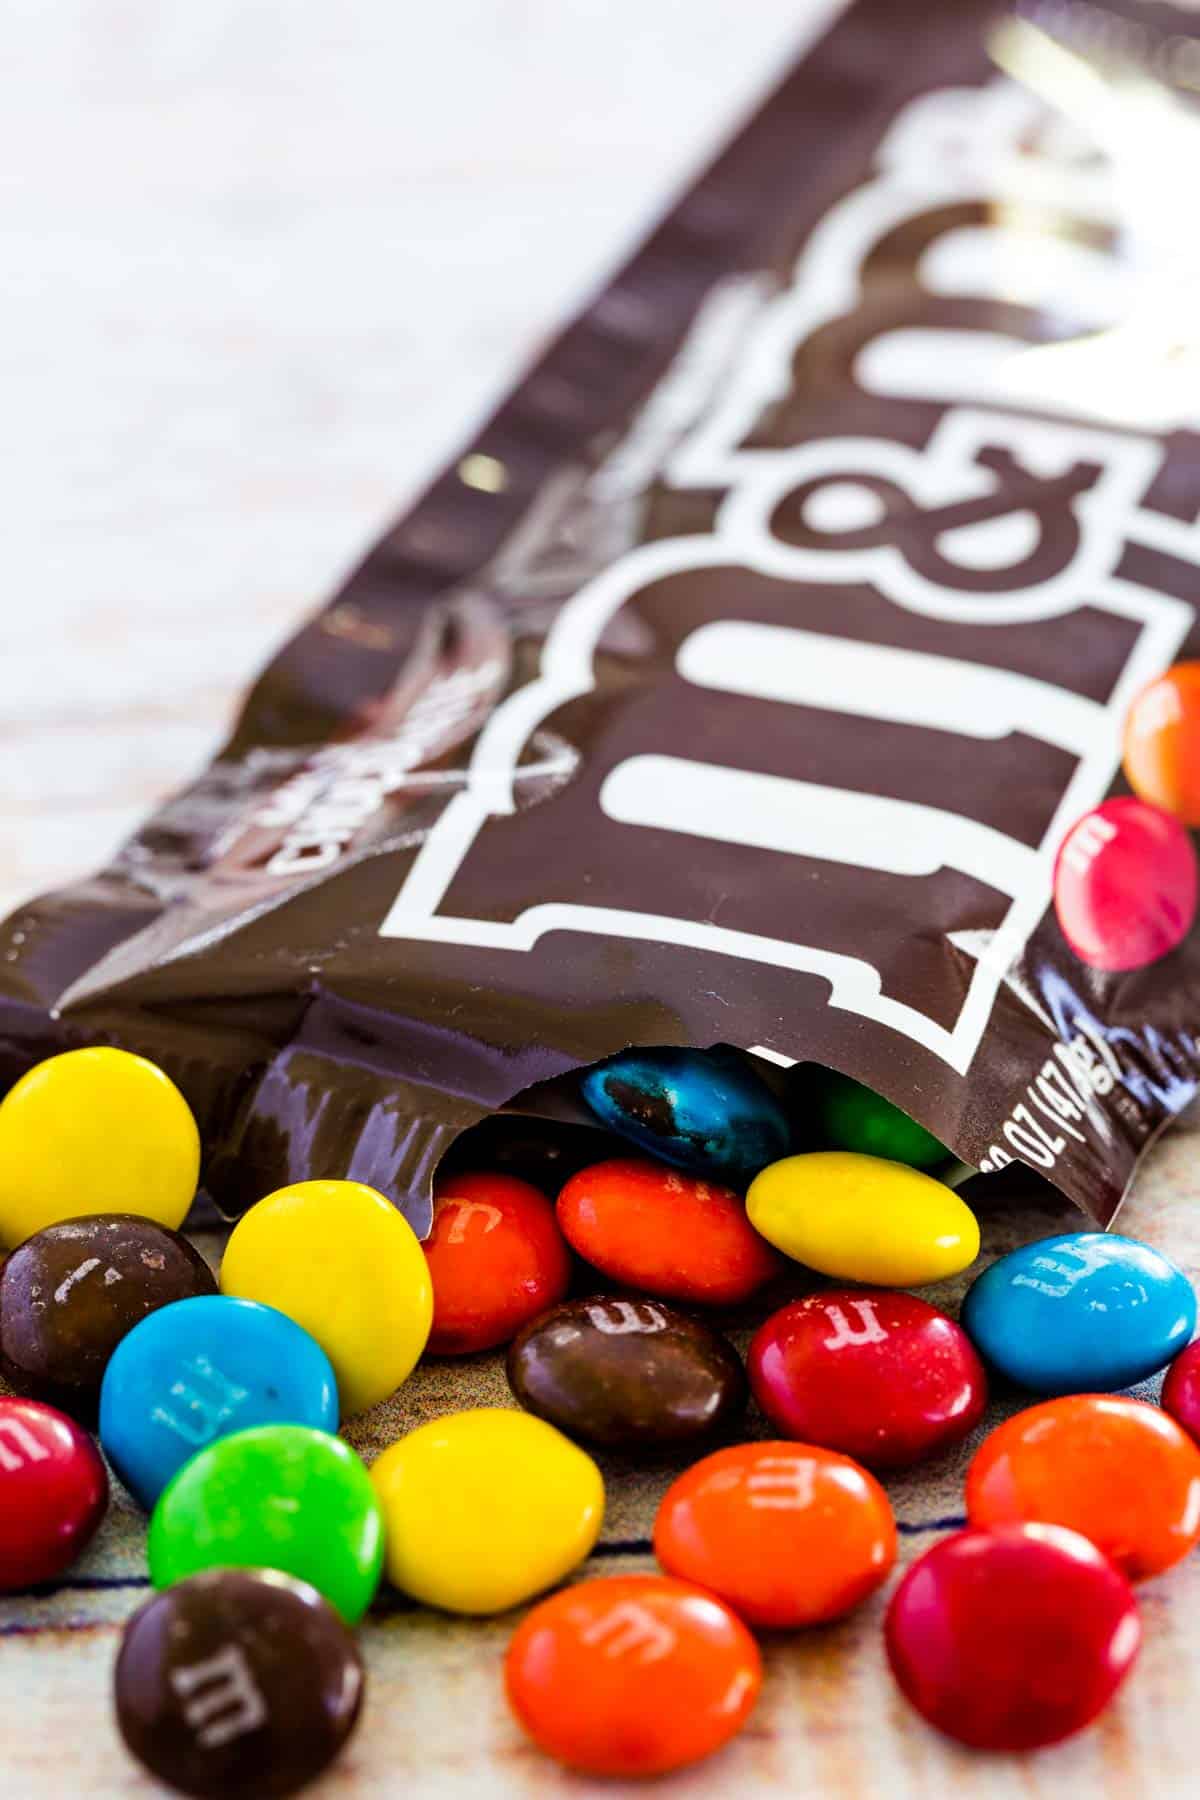 M&M's candies spilling out of a bag of plain M&M's.